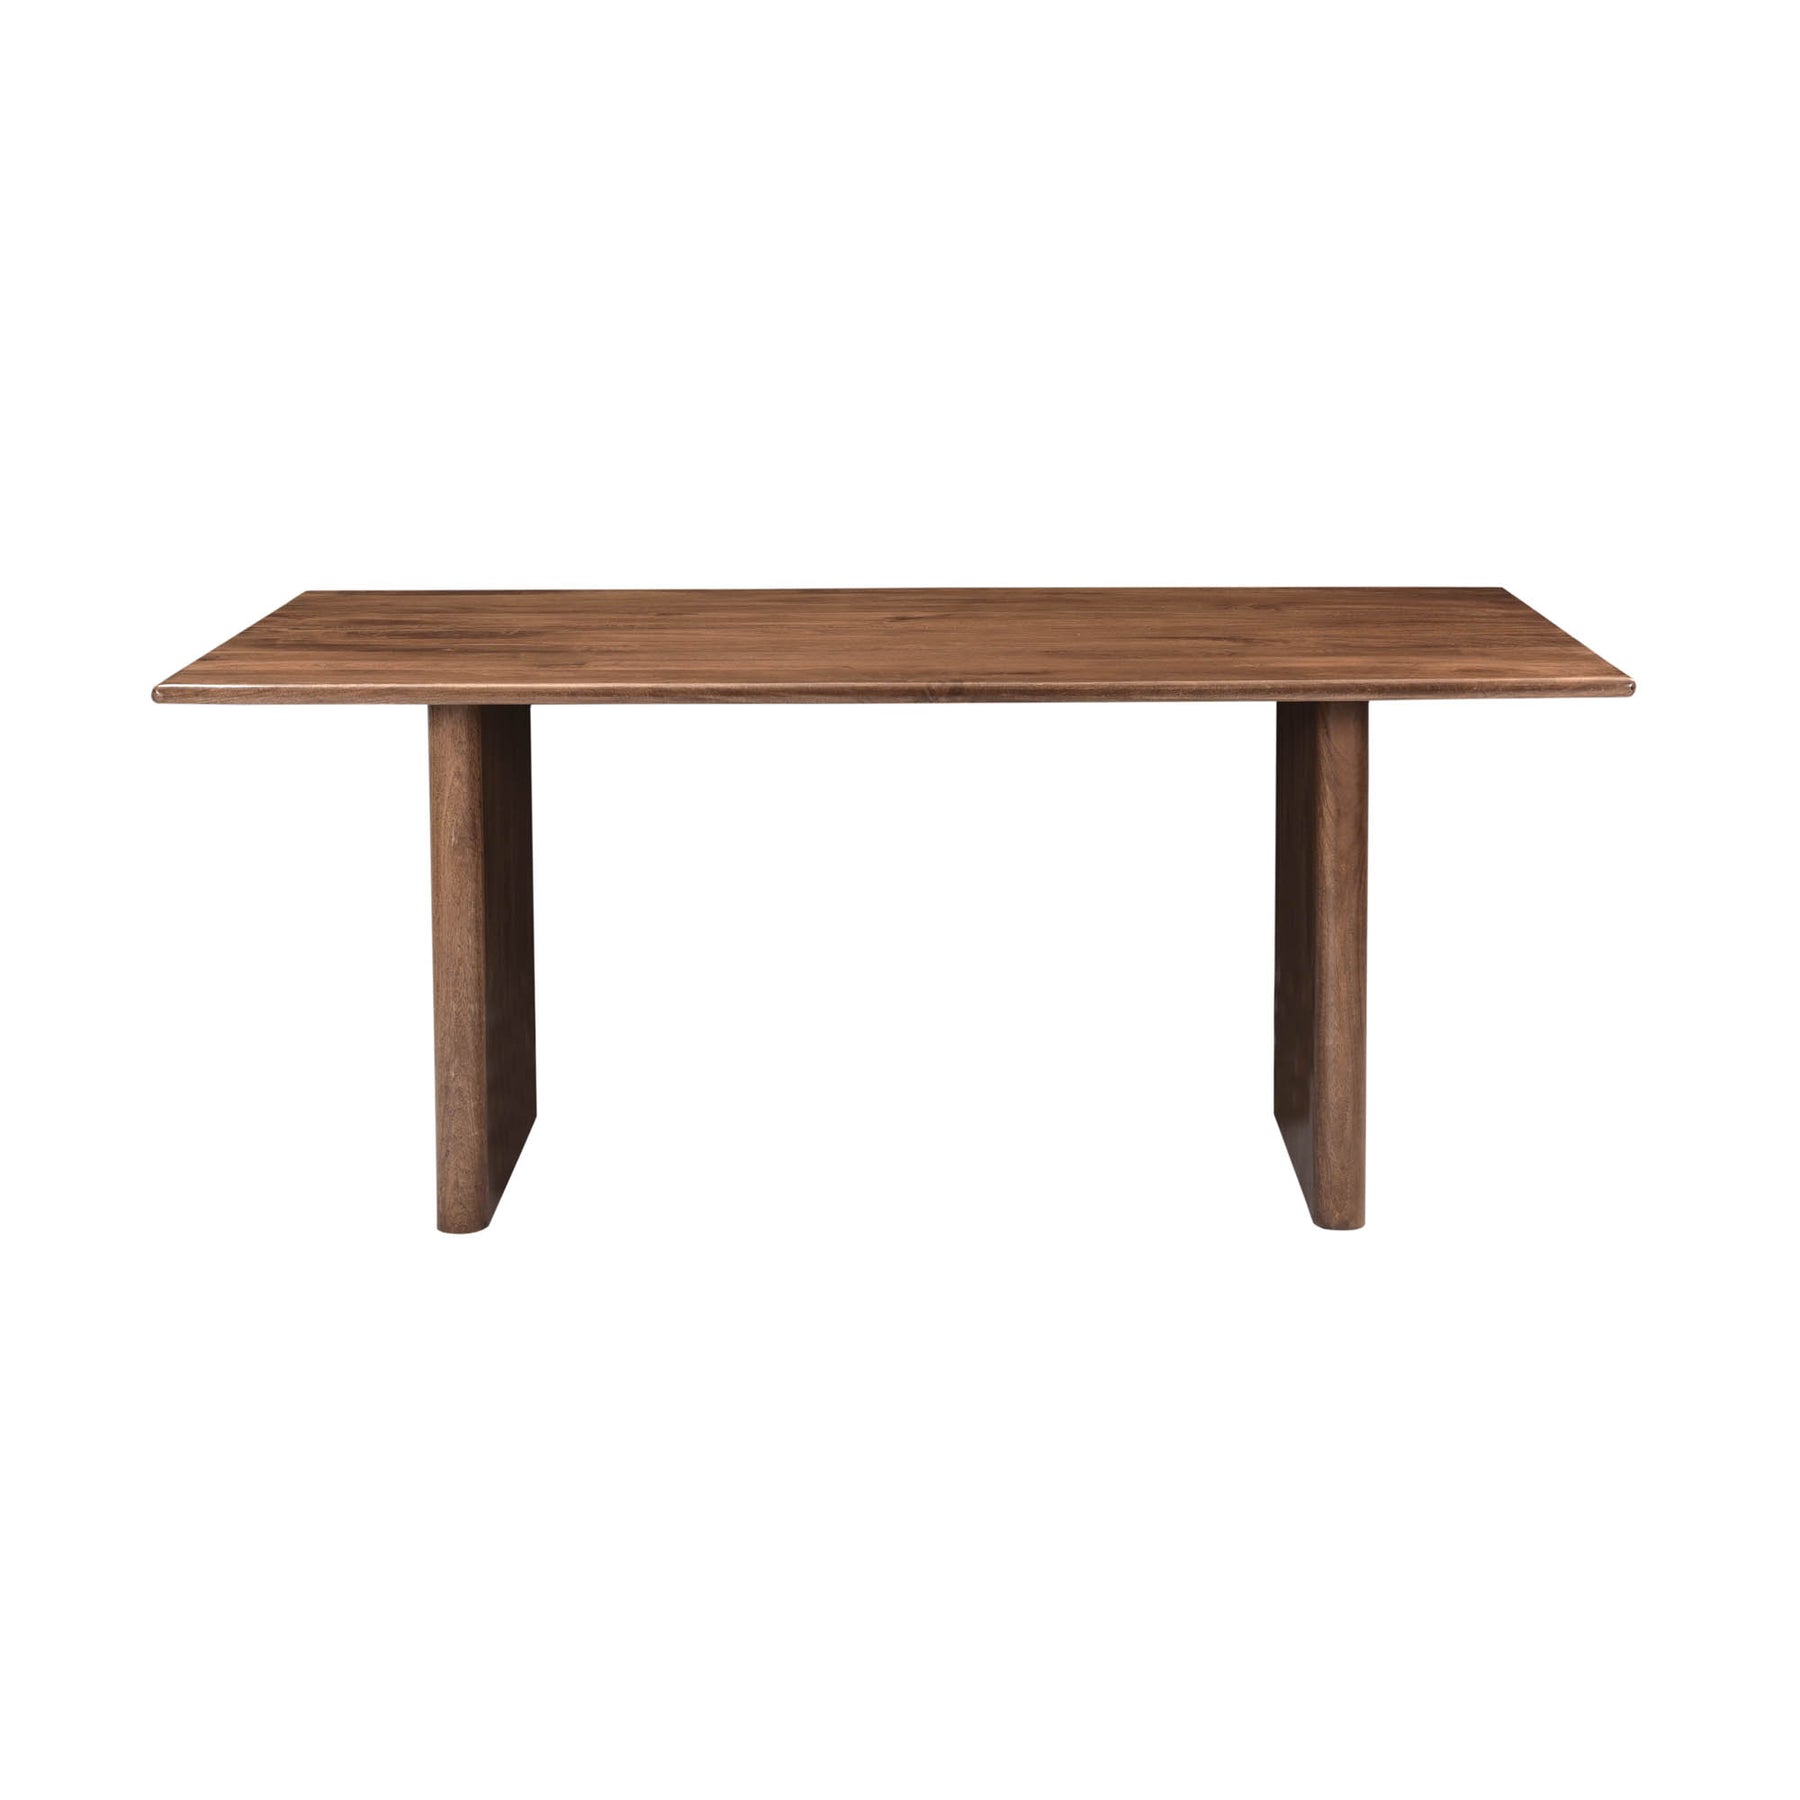 Daphne Dining Table - Rug & Weave